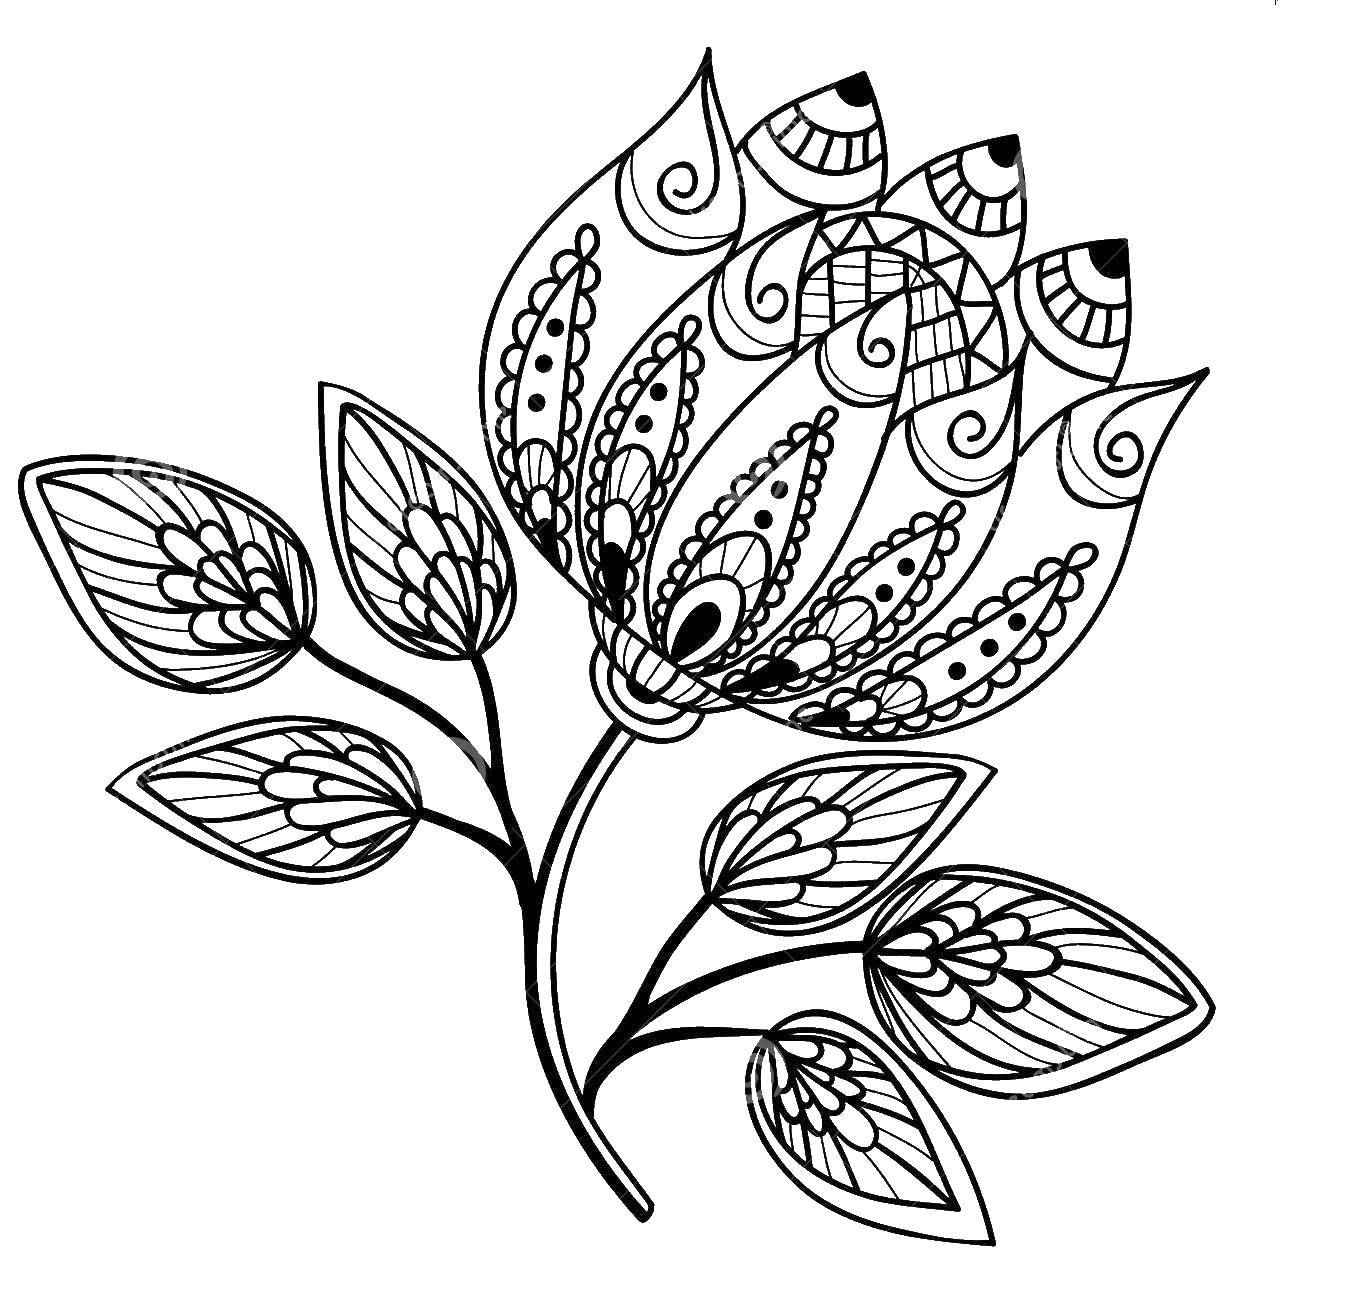 Coloring Patterned flower. Category the contours for cutting out butterflies. Tags:  Flowers, pattern.